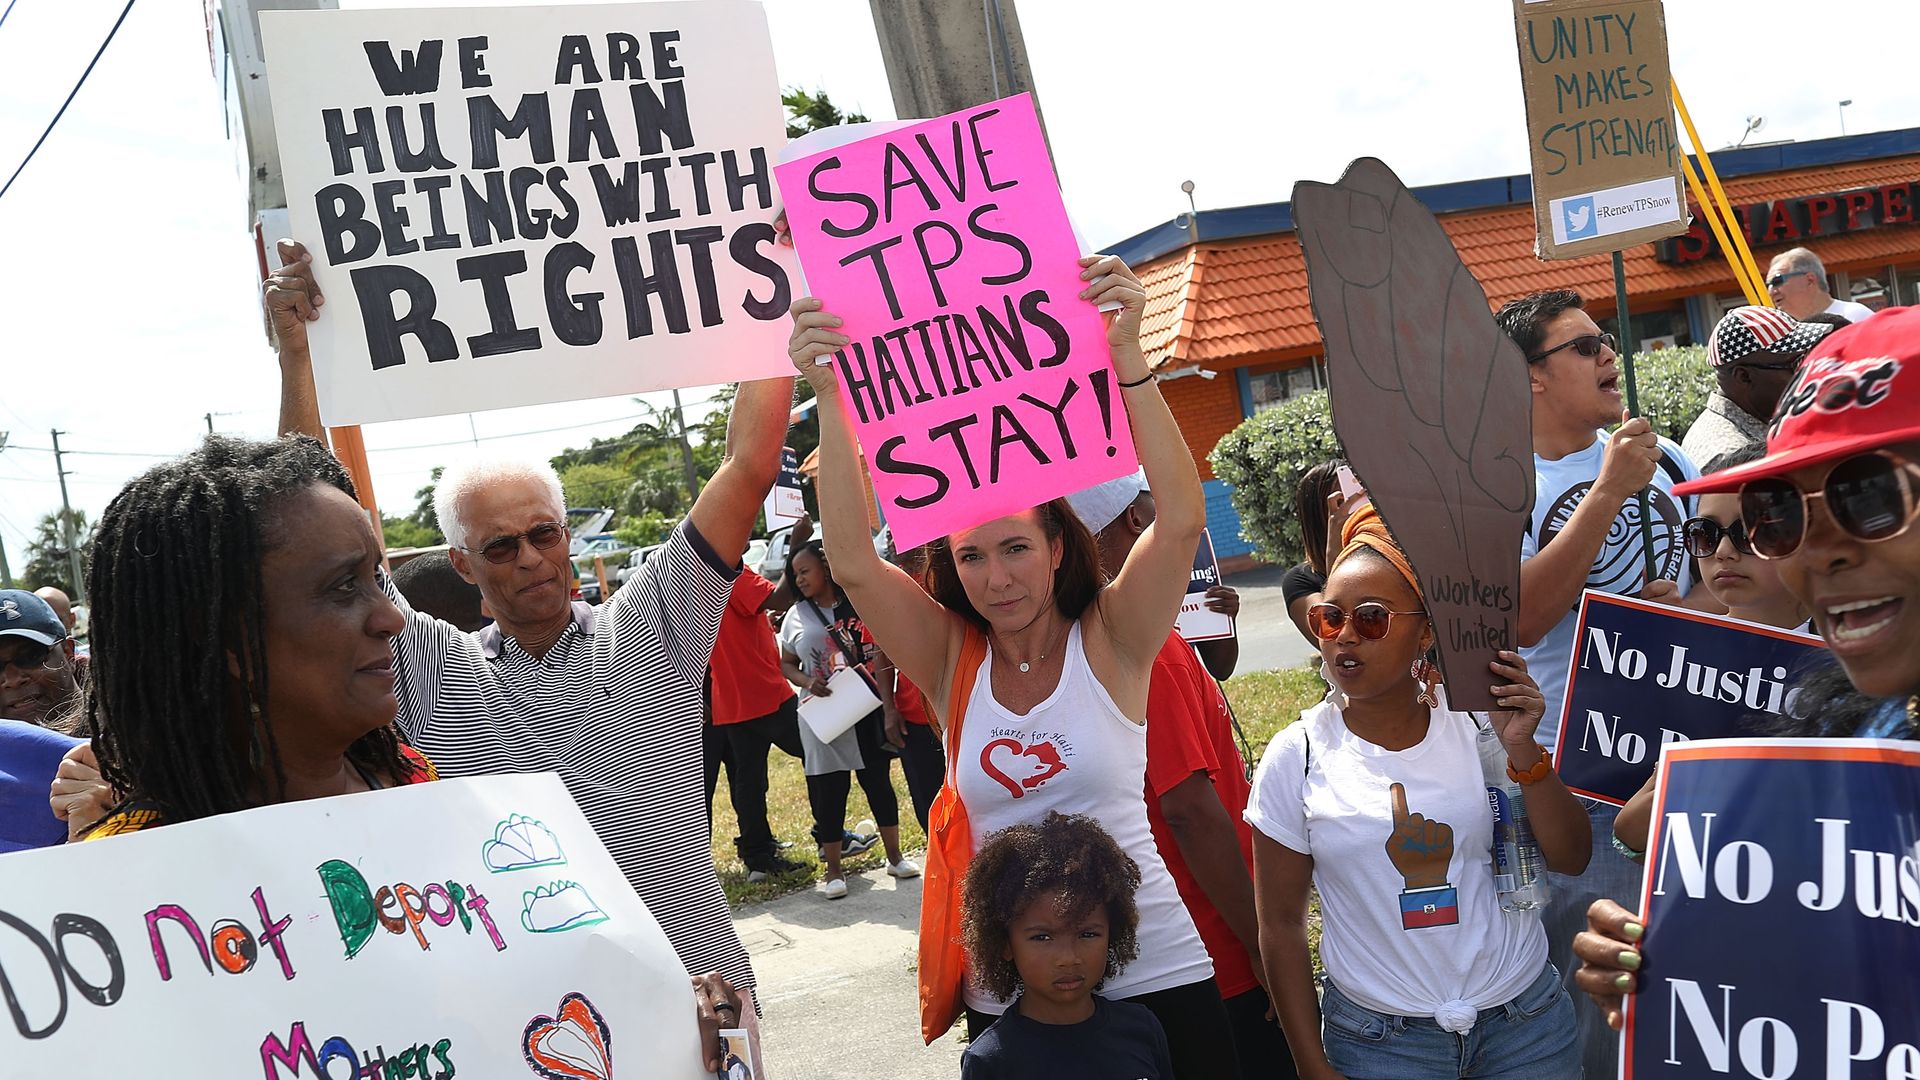 Demonstration over termination of the Temporary Protected Status for Haitians in Miami, Florida. Photo: Joe Raedle/Getty Images)